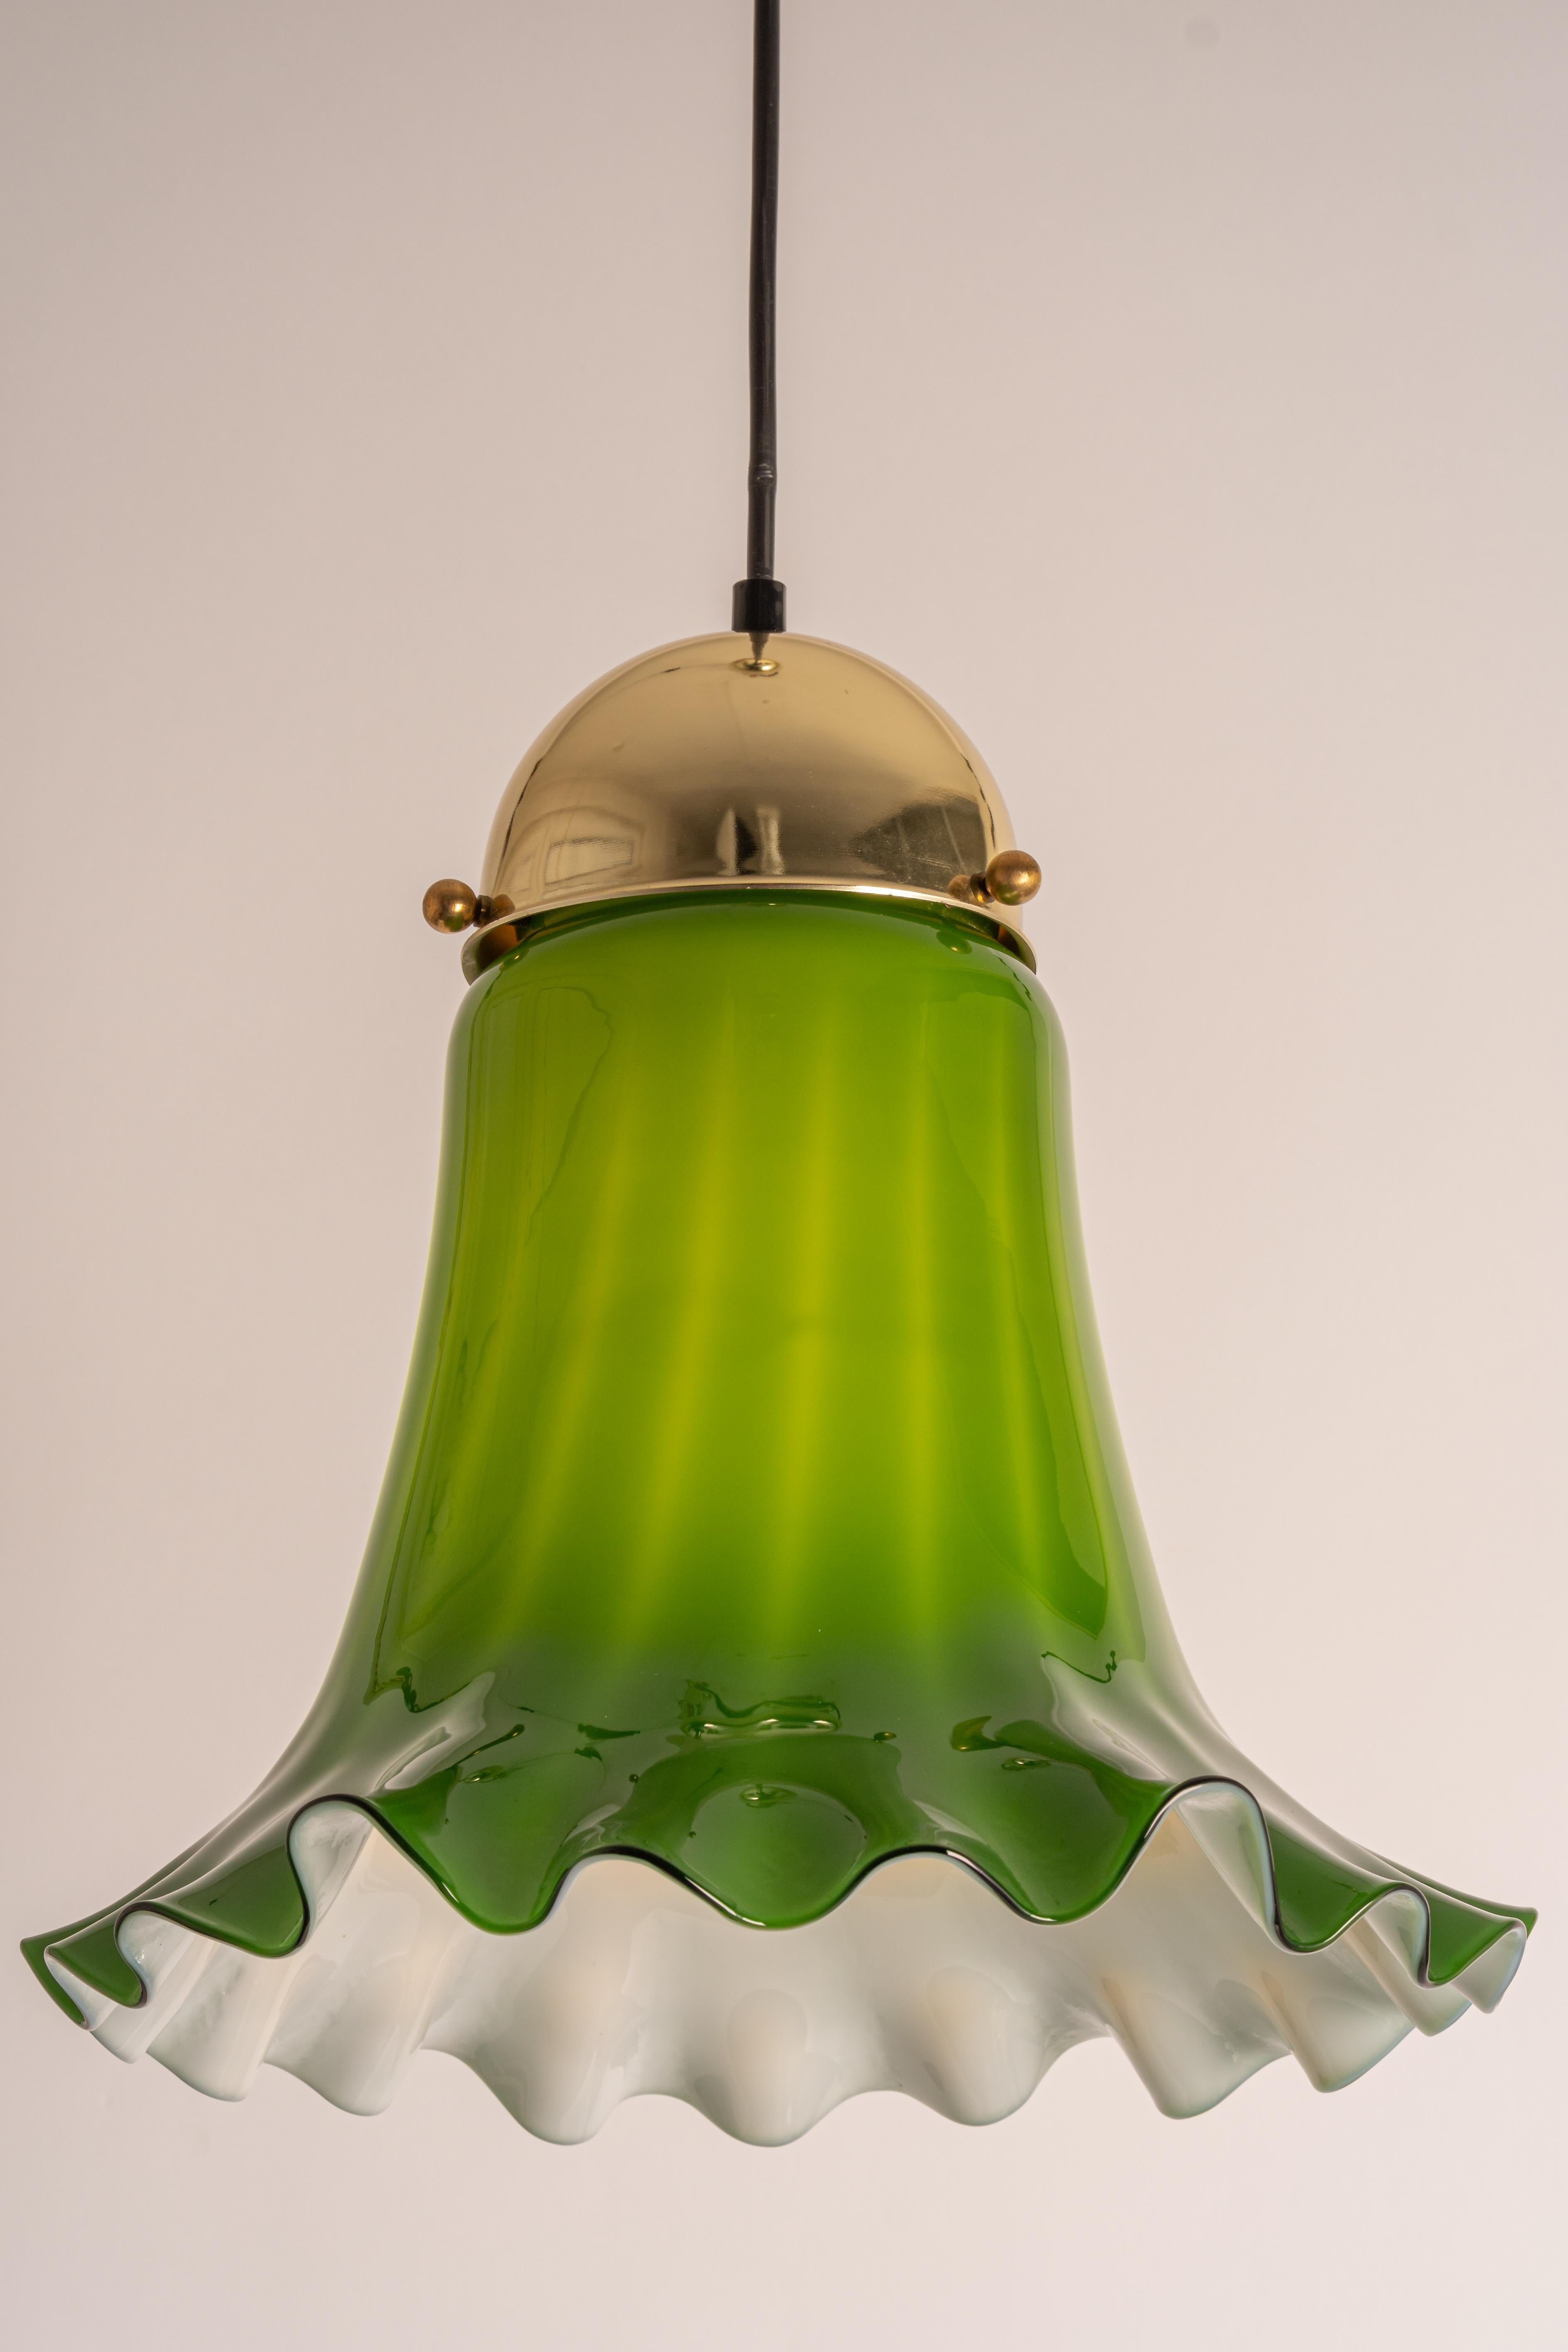 Green glass pendant light by Peill & Putzler, manufactured in Germany, circa the 1970s.

High quality and in very good condition. Cleaned, well-wired, and ready to use. 
The fixture requires 1x E27 Standard bulbs with 100W max
Light bulbs are